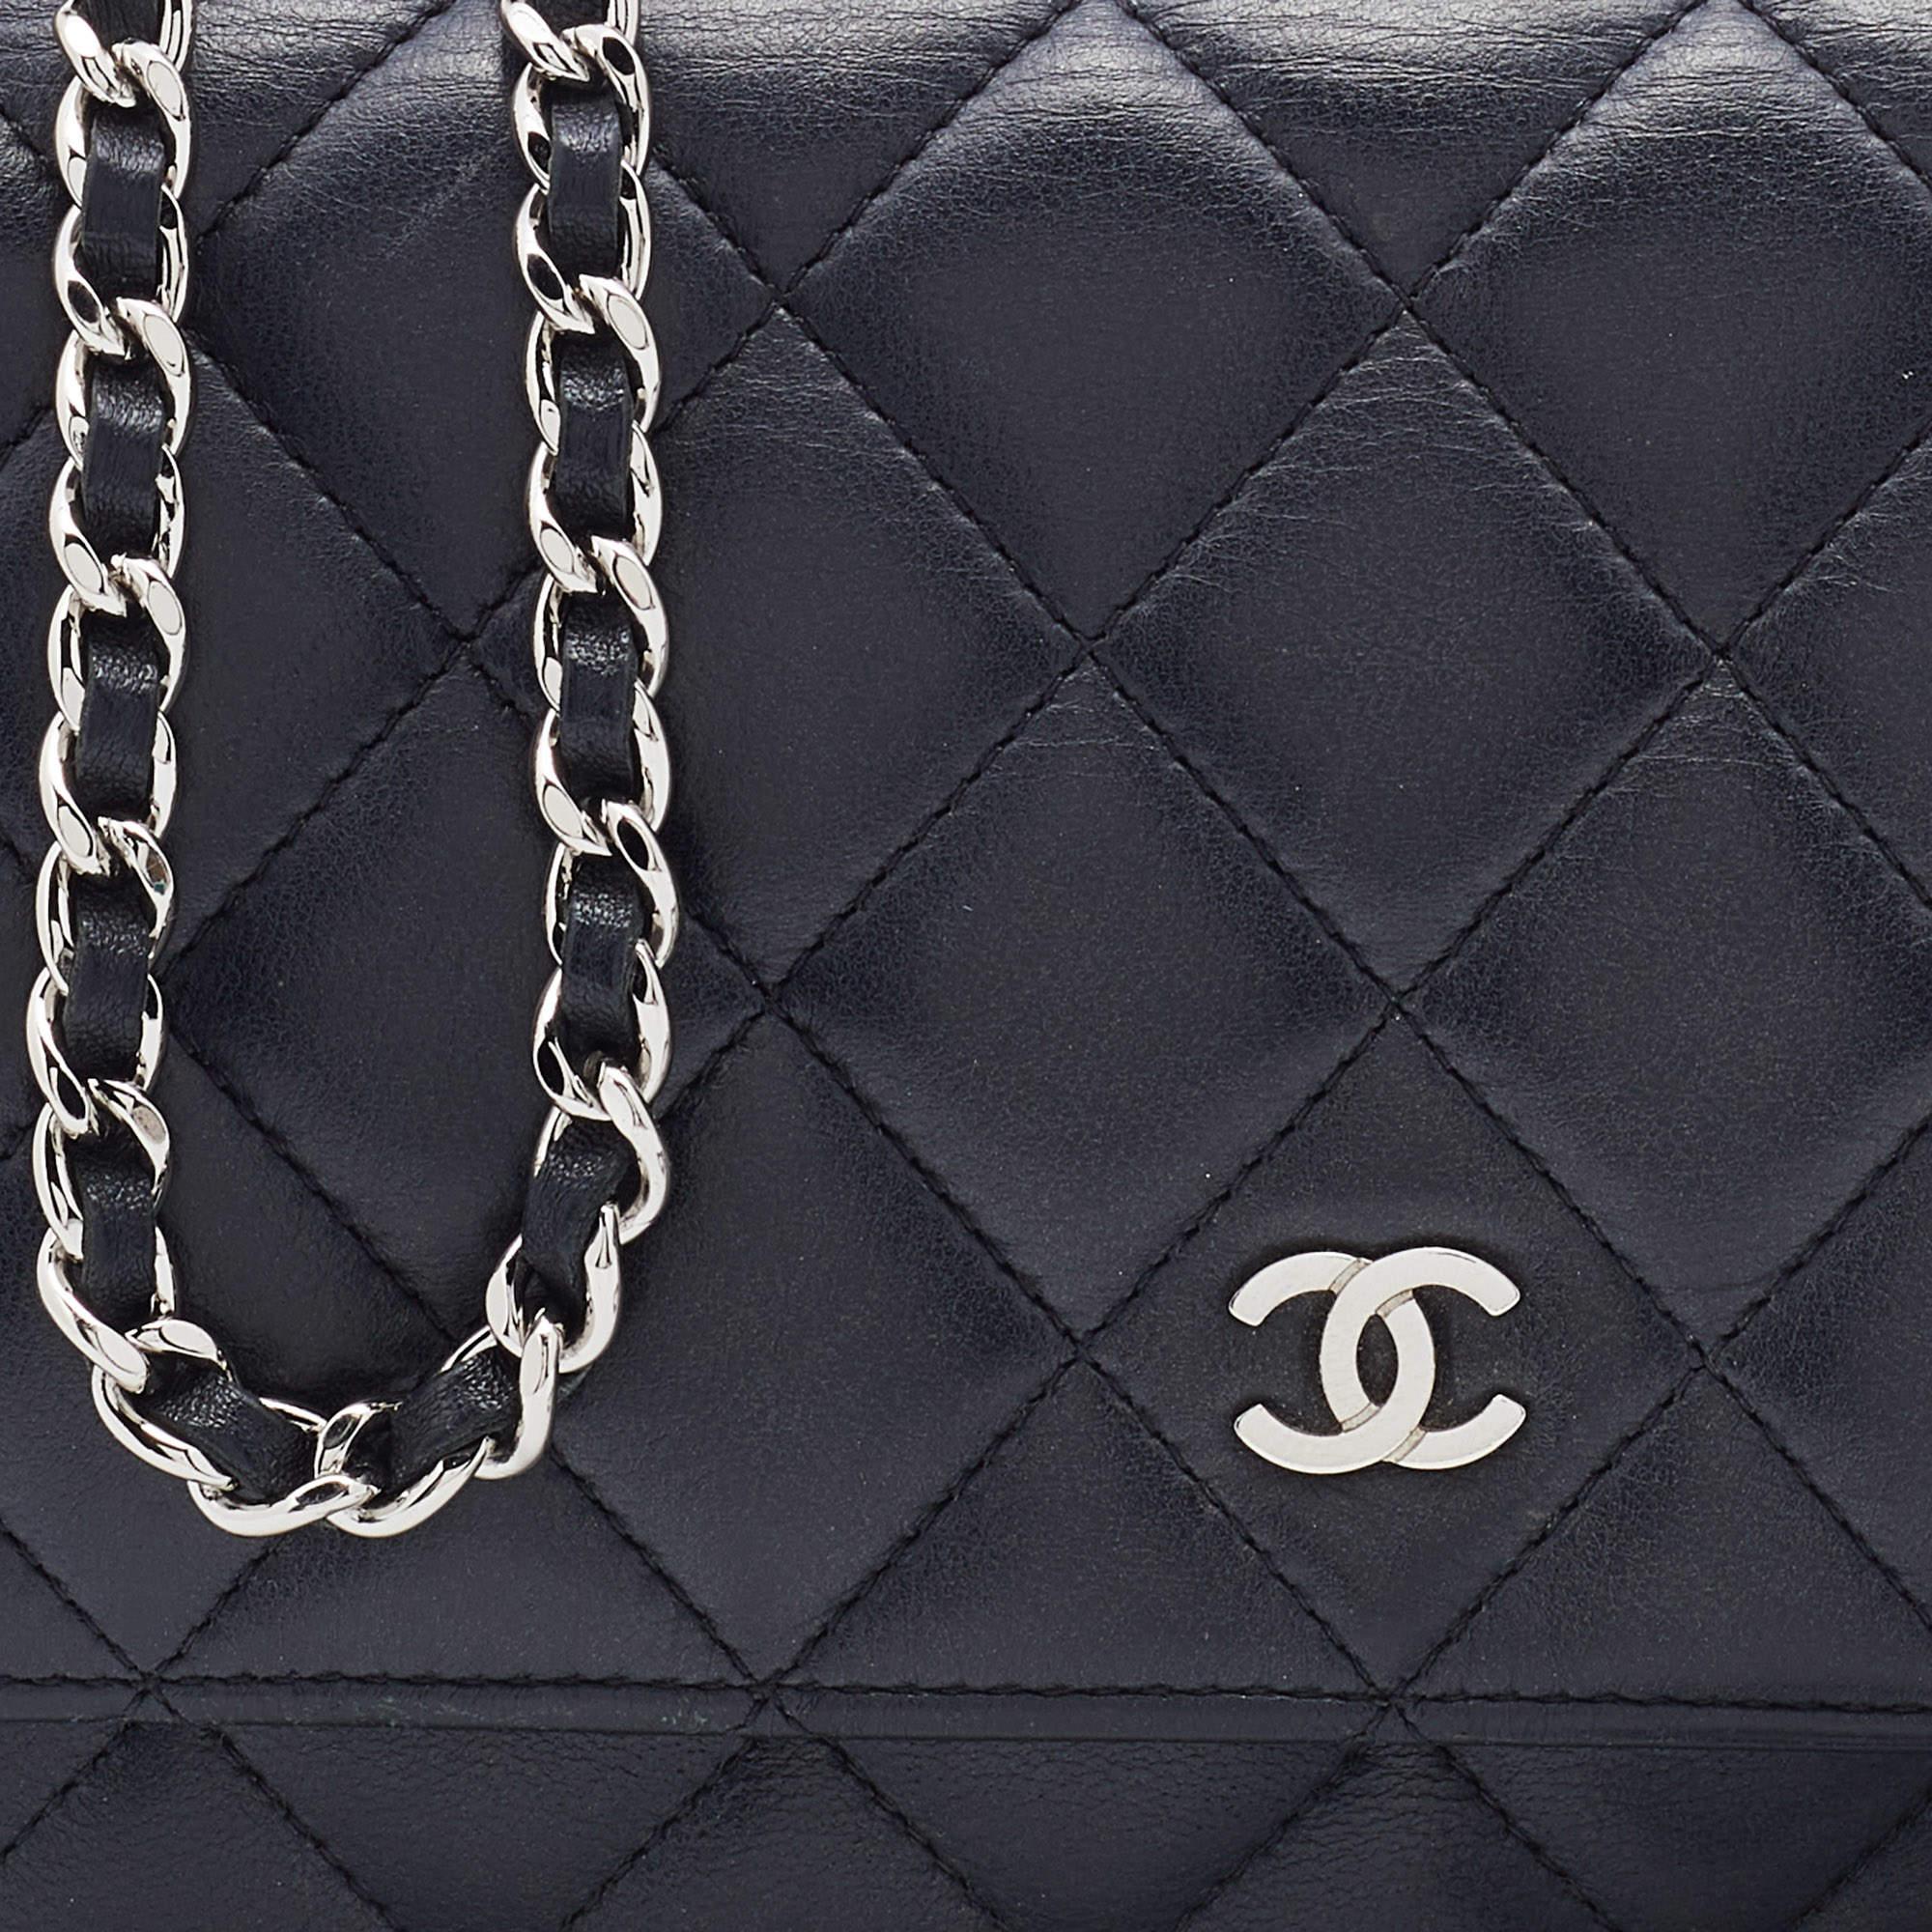 Chanel Black Quilted Leather Classic Wallet on Chain 7